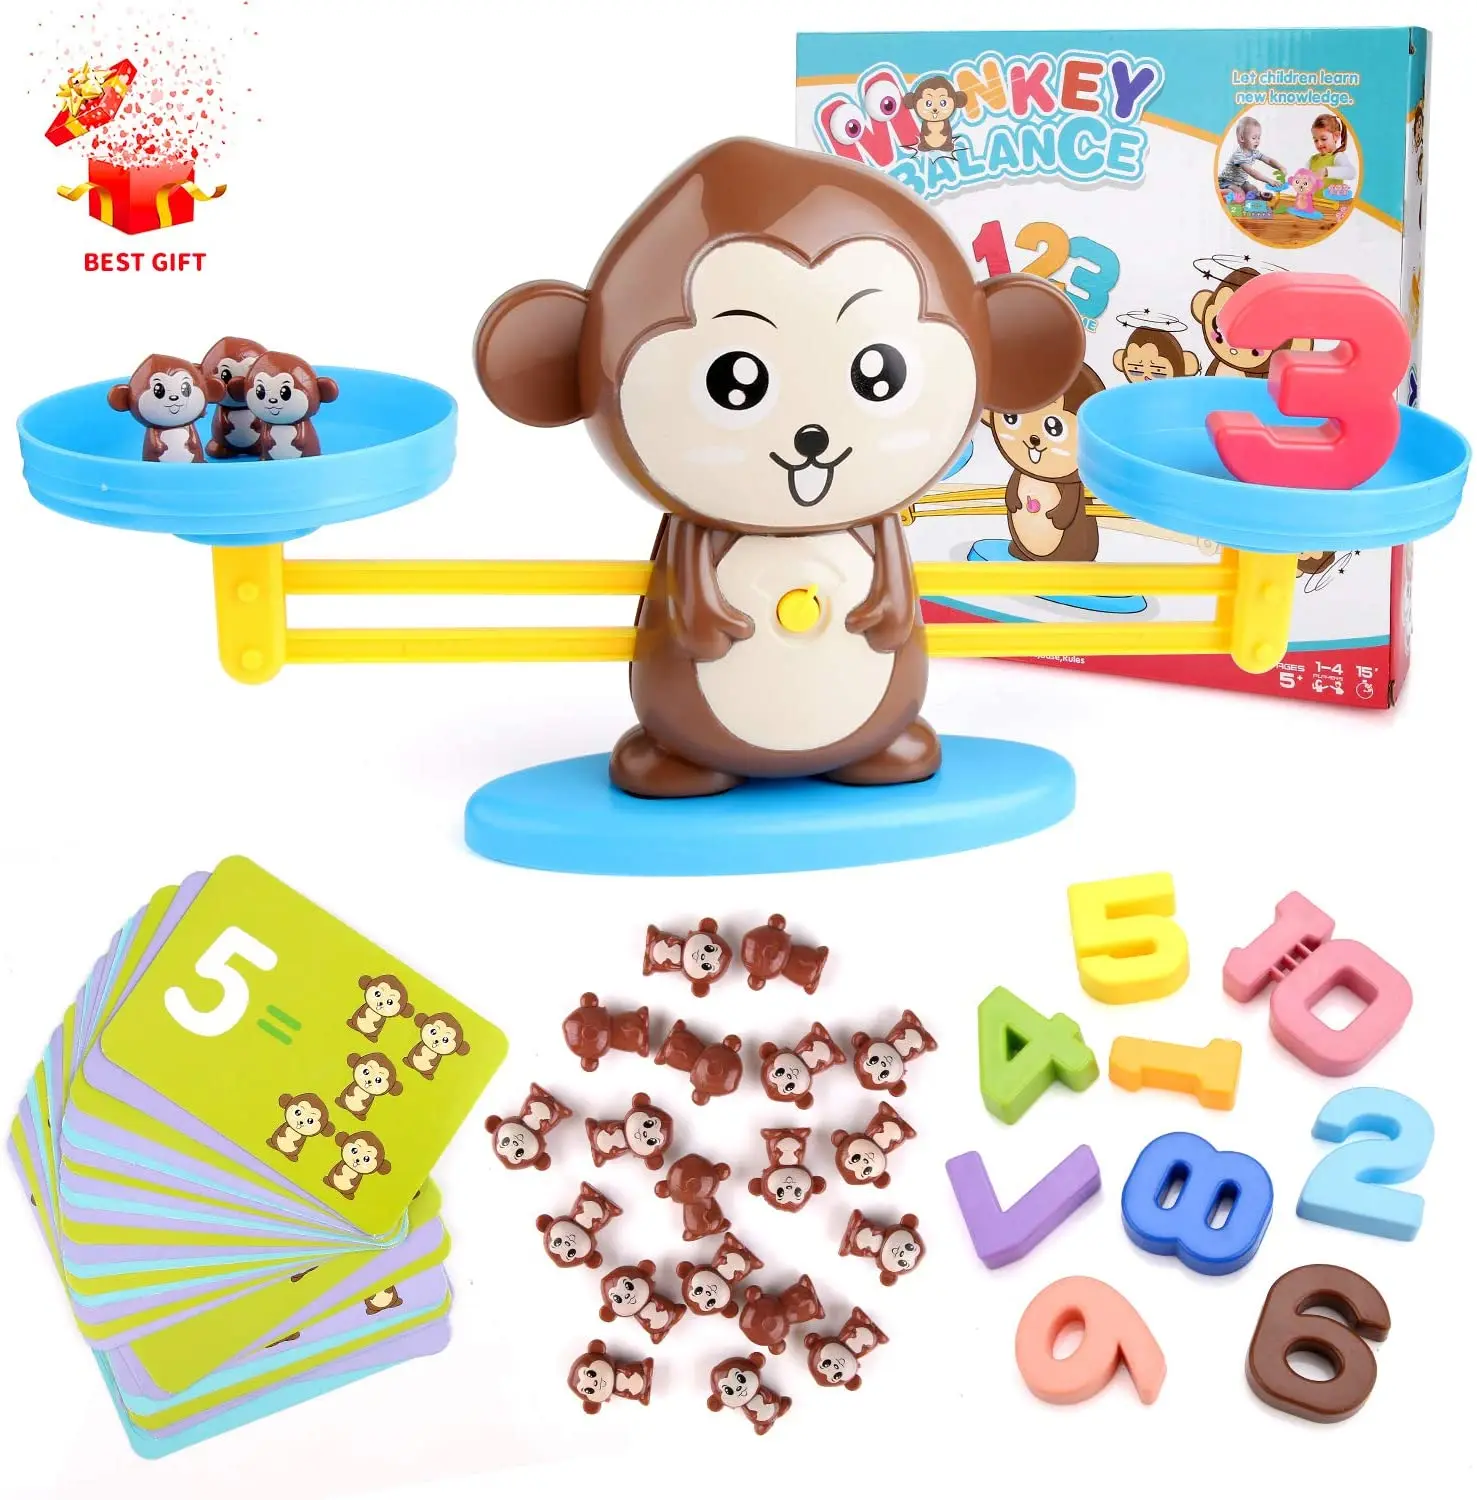 Monkey Balance Educational Maths game for kids Creative ways to play & learn 